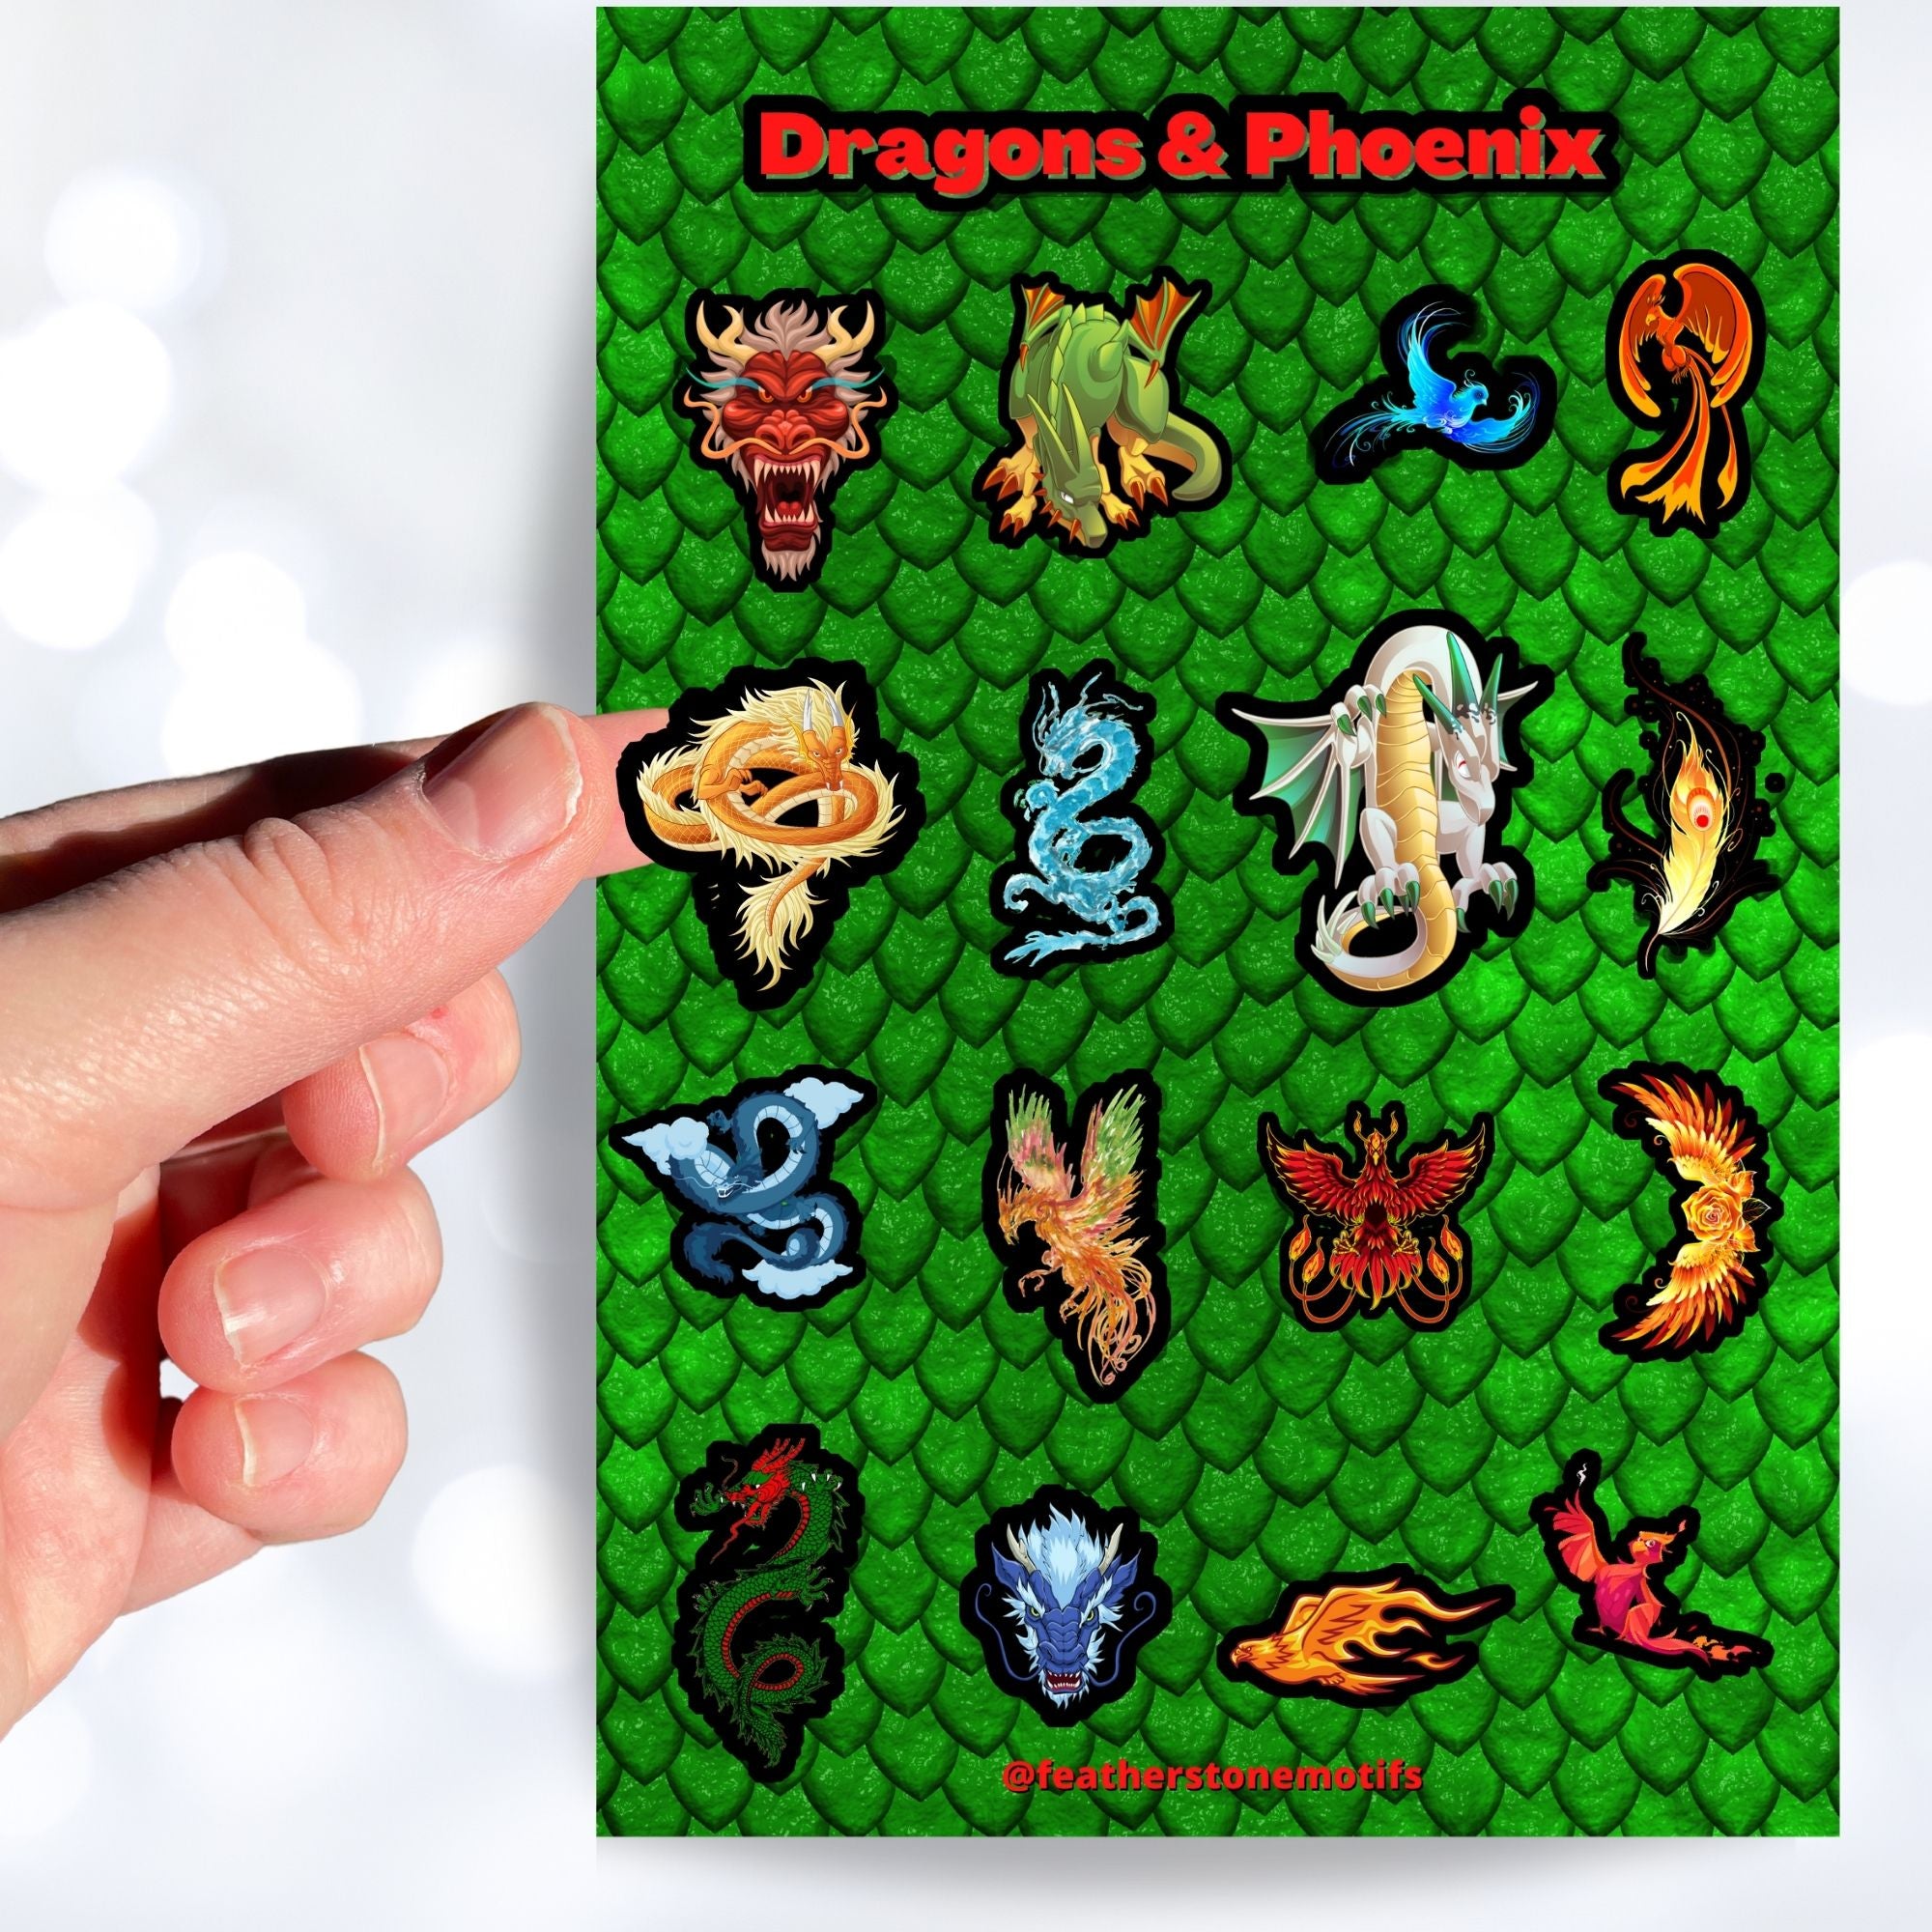 Set on a background of green scales, this sticker sheet has 16 different stickers of dragons and phoenix. This image shows a hand holding a feathery golden dragon above the sticker sheet.